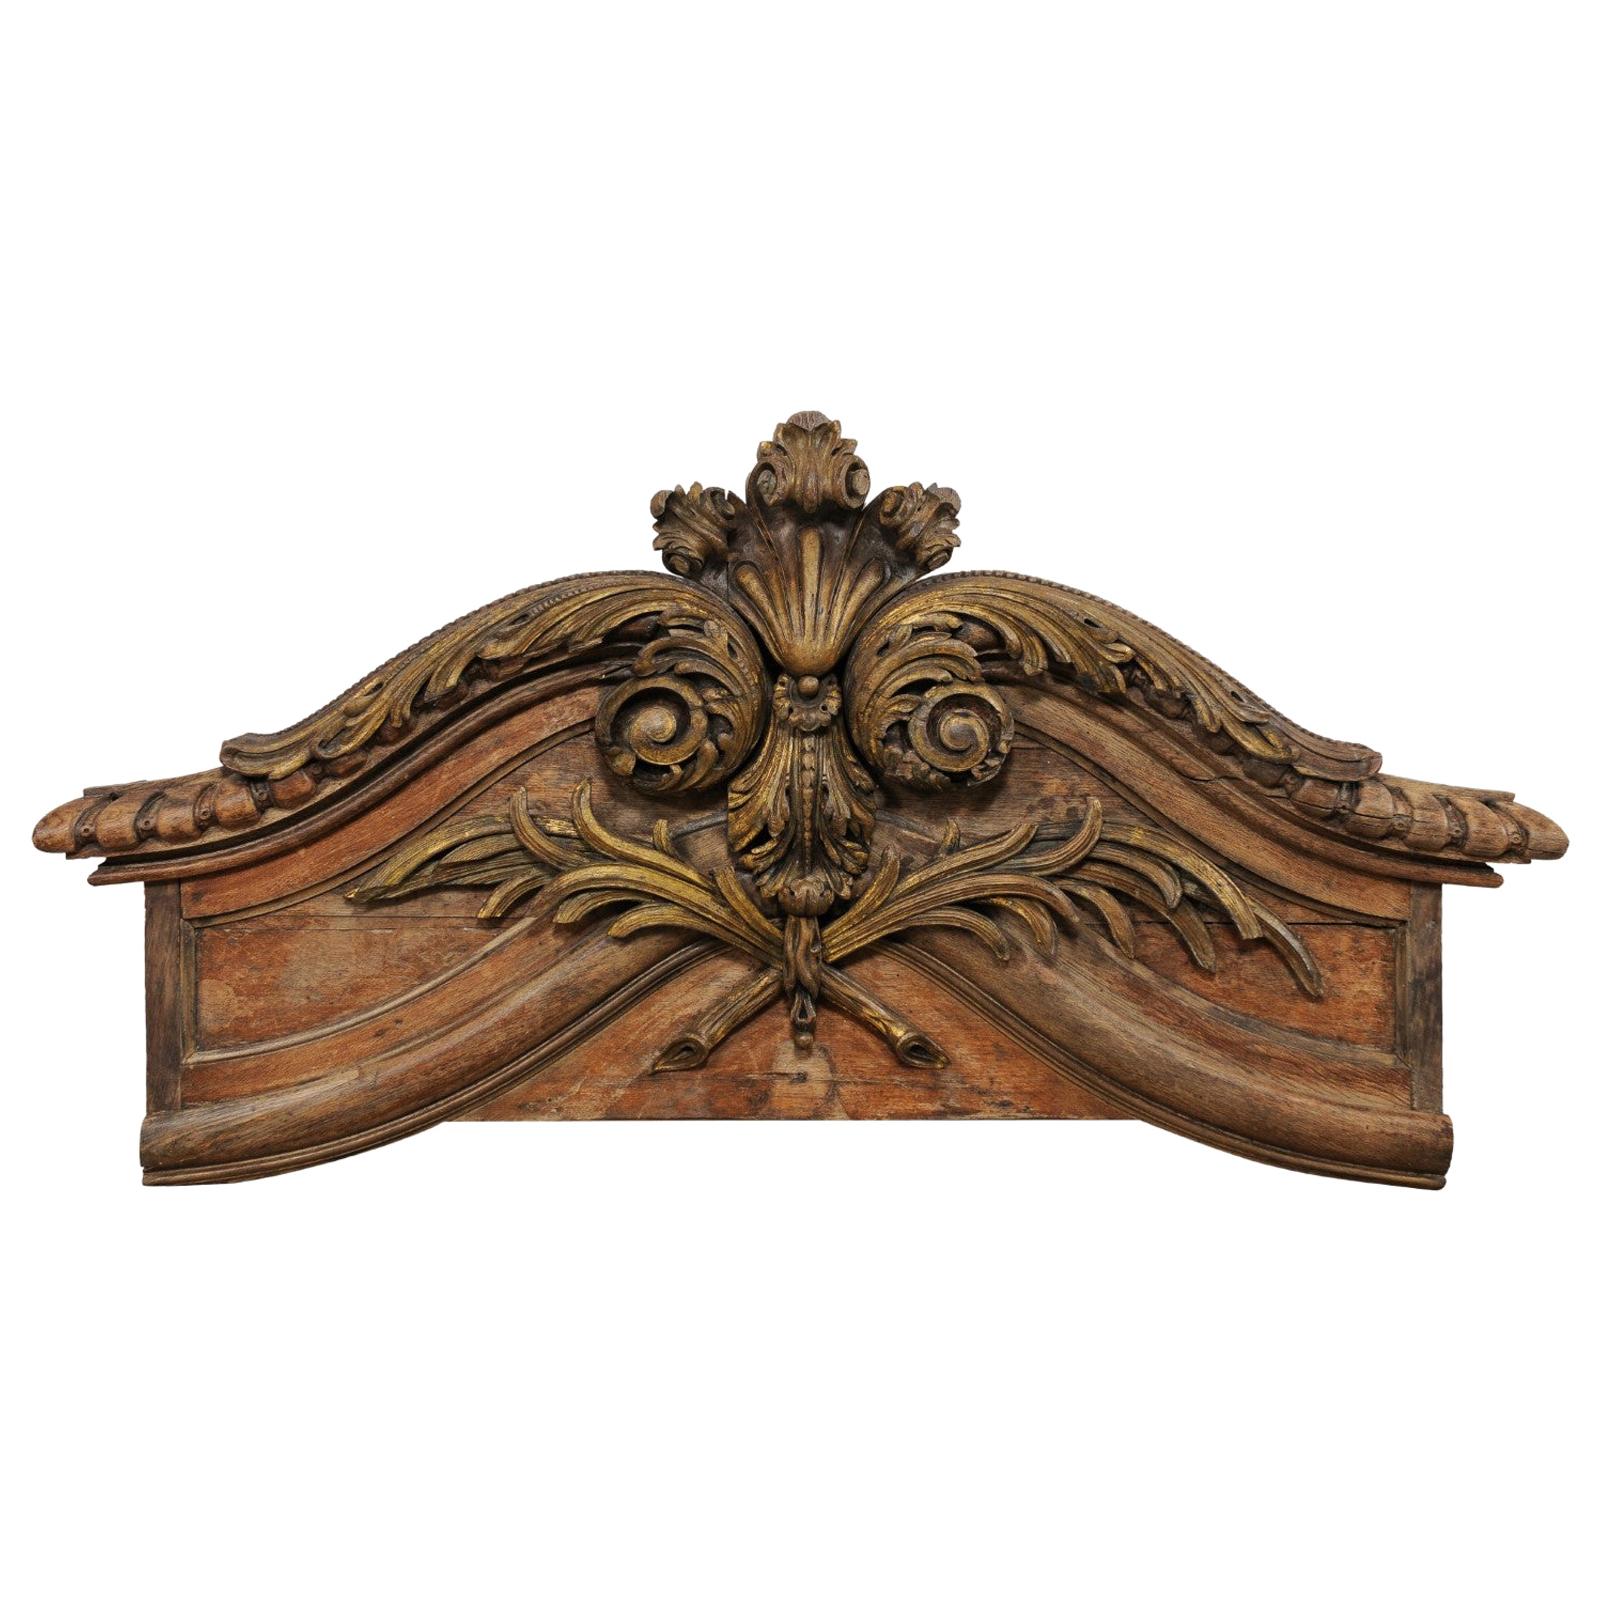 19th Century Carved-Wood Wall Plaque, Great for a Headboard